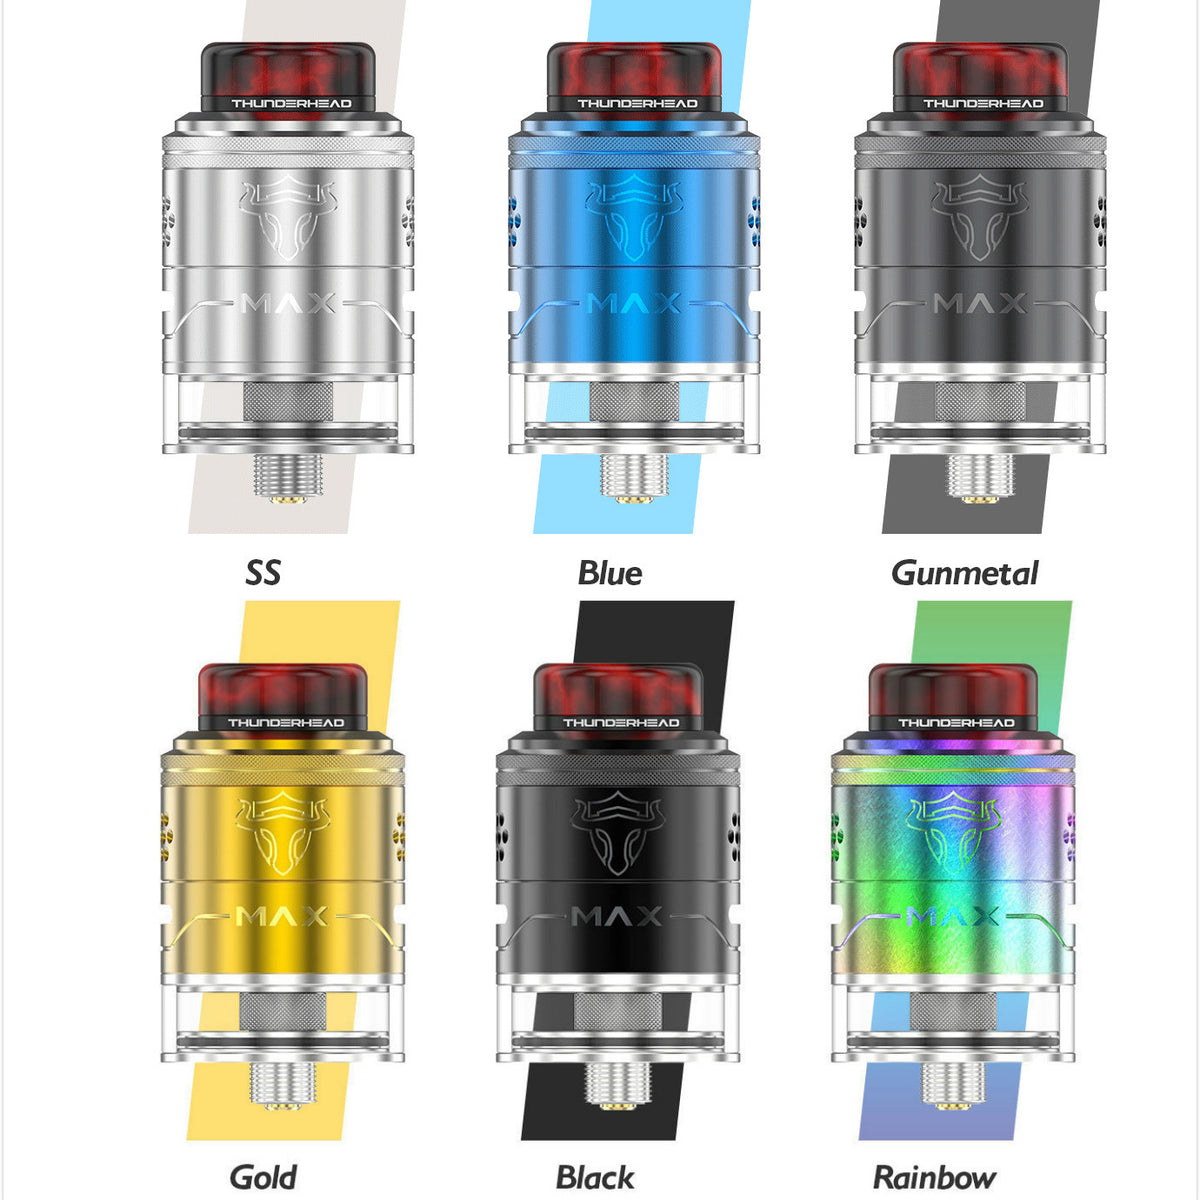 Aromamizer plus rdta by steam crave фото 99